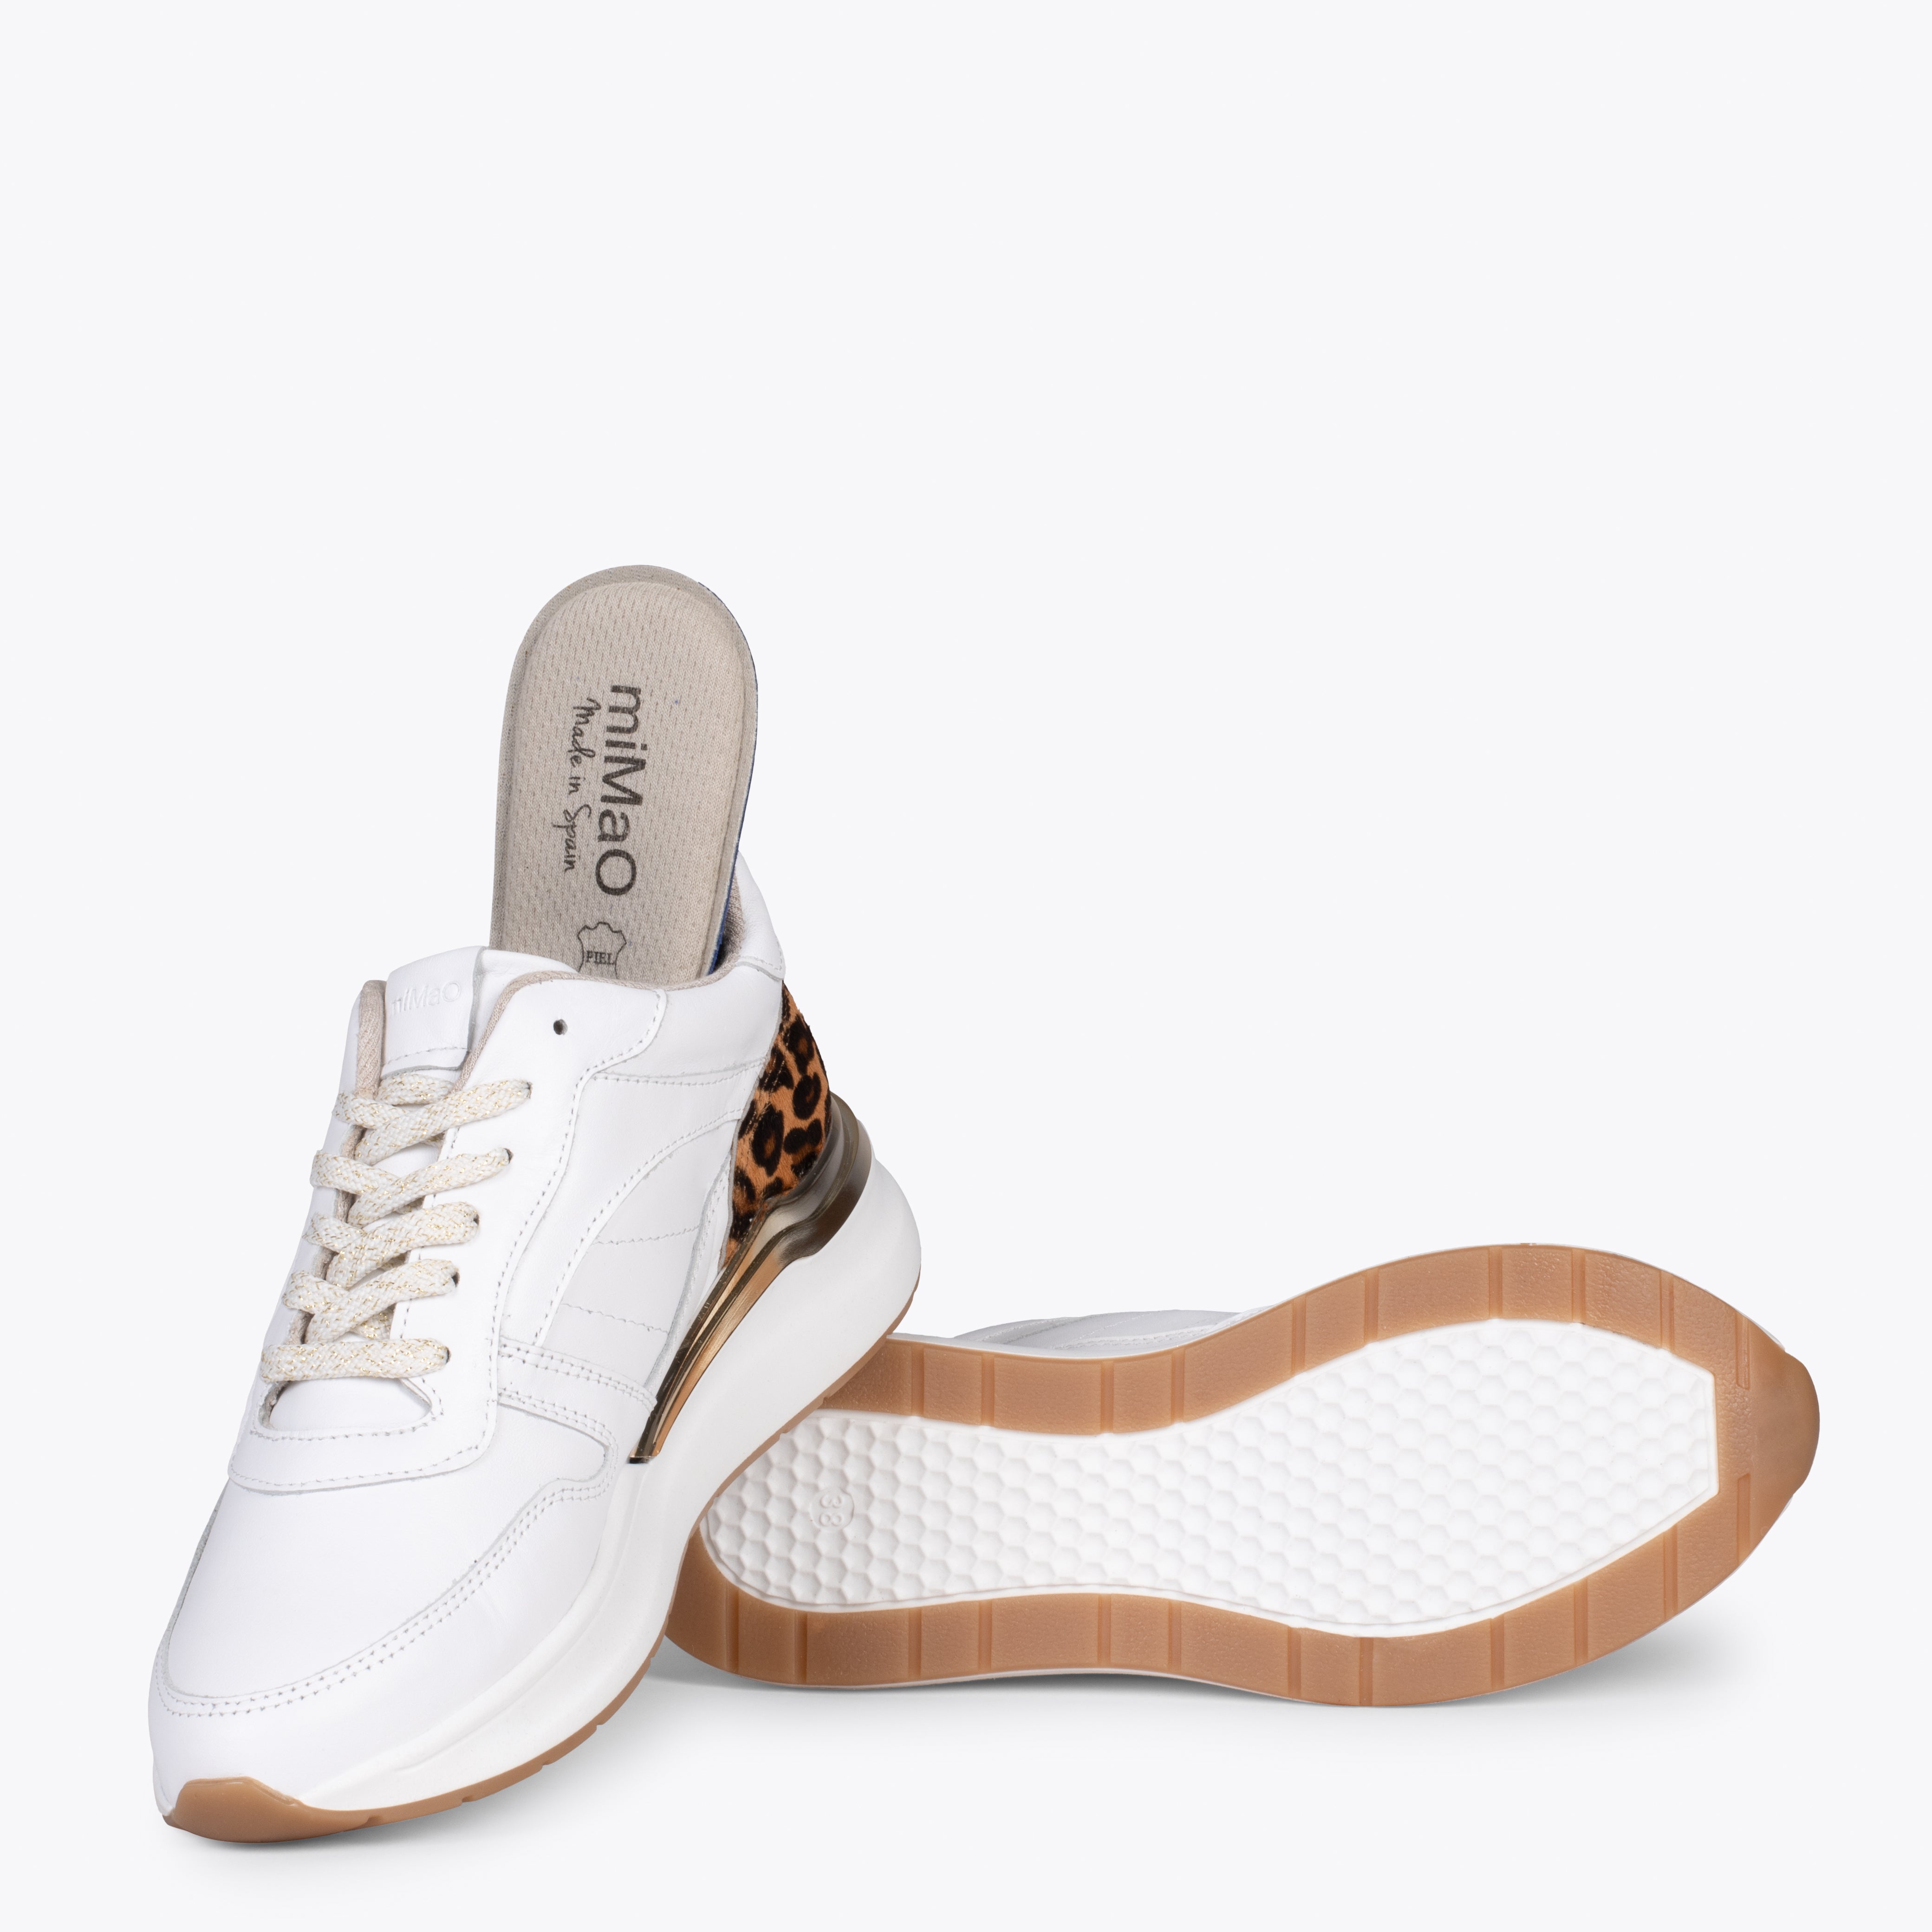 FREEDOM – WHITE & LEOPARD sneakers with removable insole